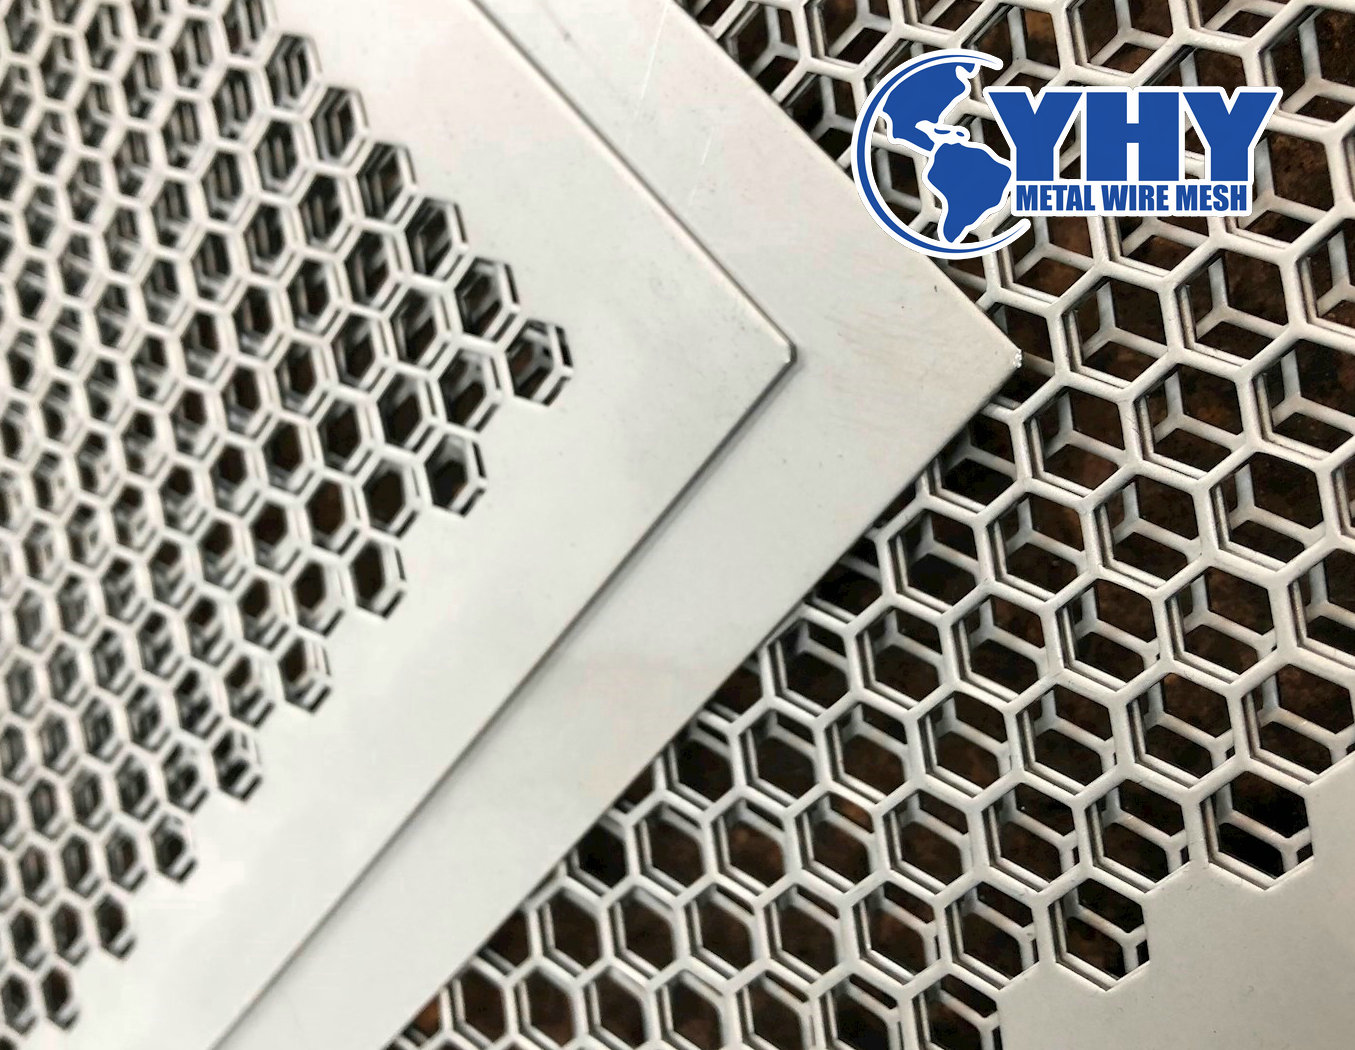 Special hole shape perforated mesh panel for exterior wall decoration